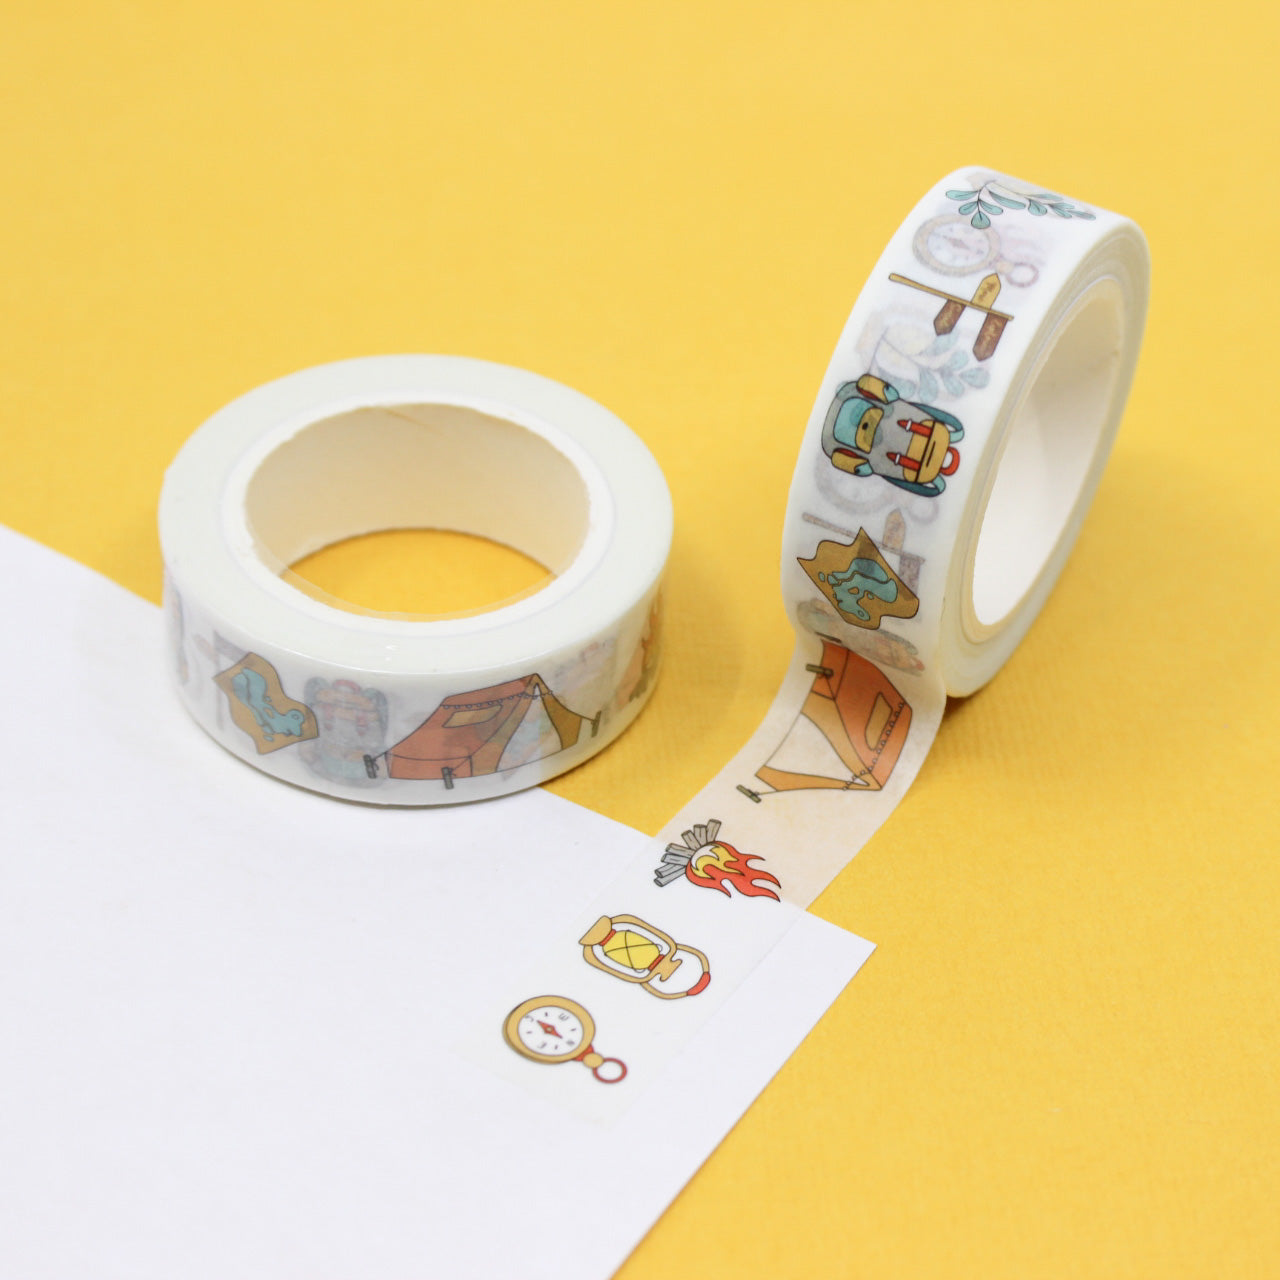 This washi tape features various camping supplies like tents, campfires, and backpacks, ideal for adding a rustic outdoor touch to your projects or journals. This tape is sold at BBB Supplies Craft Shop.